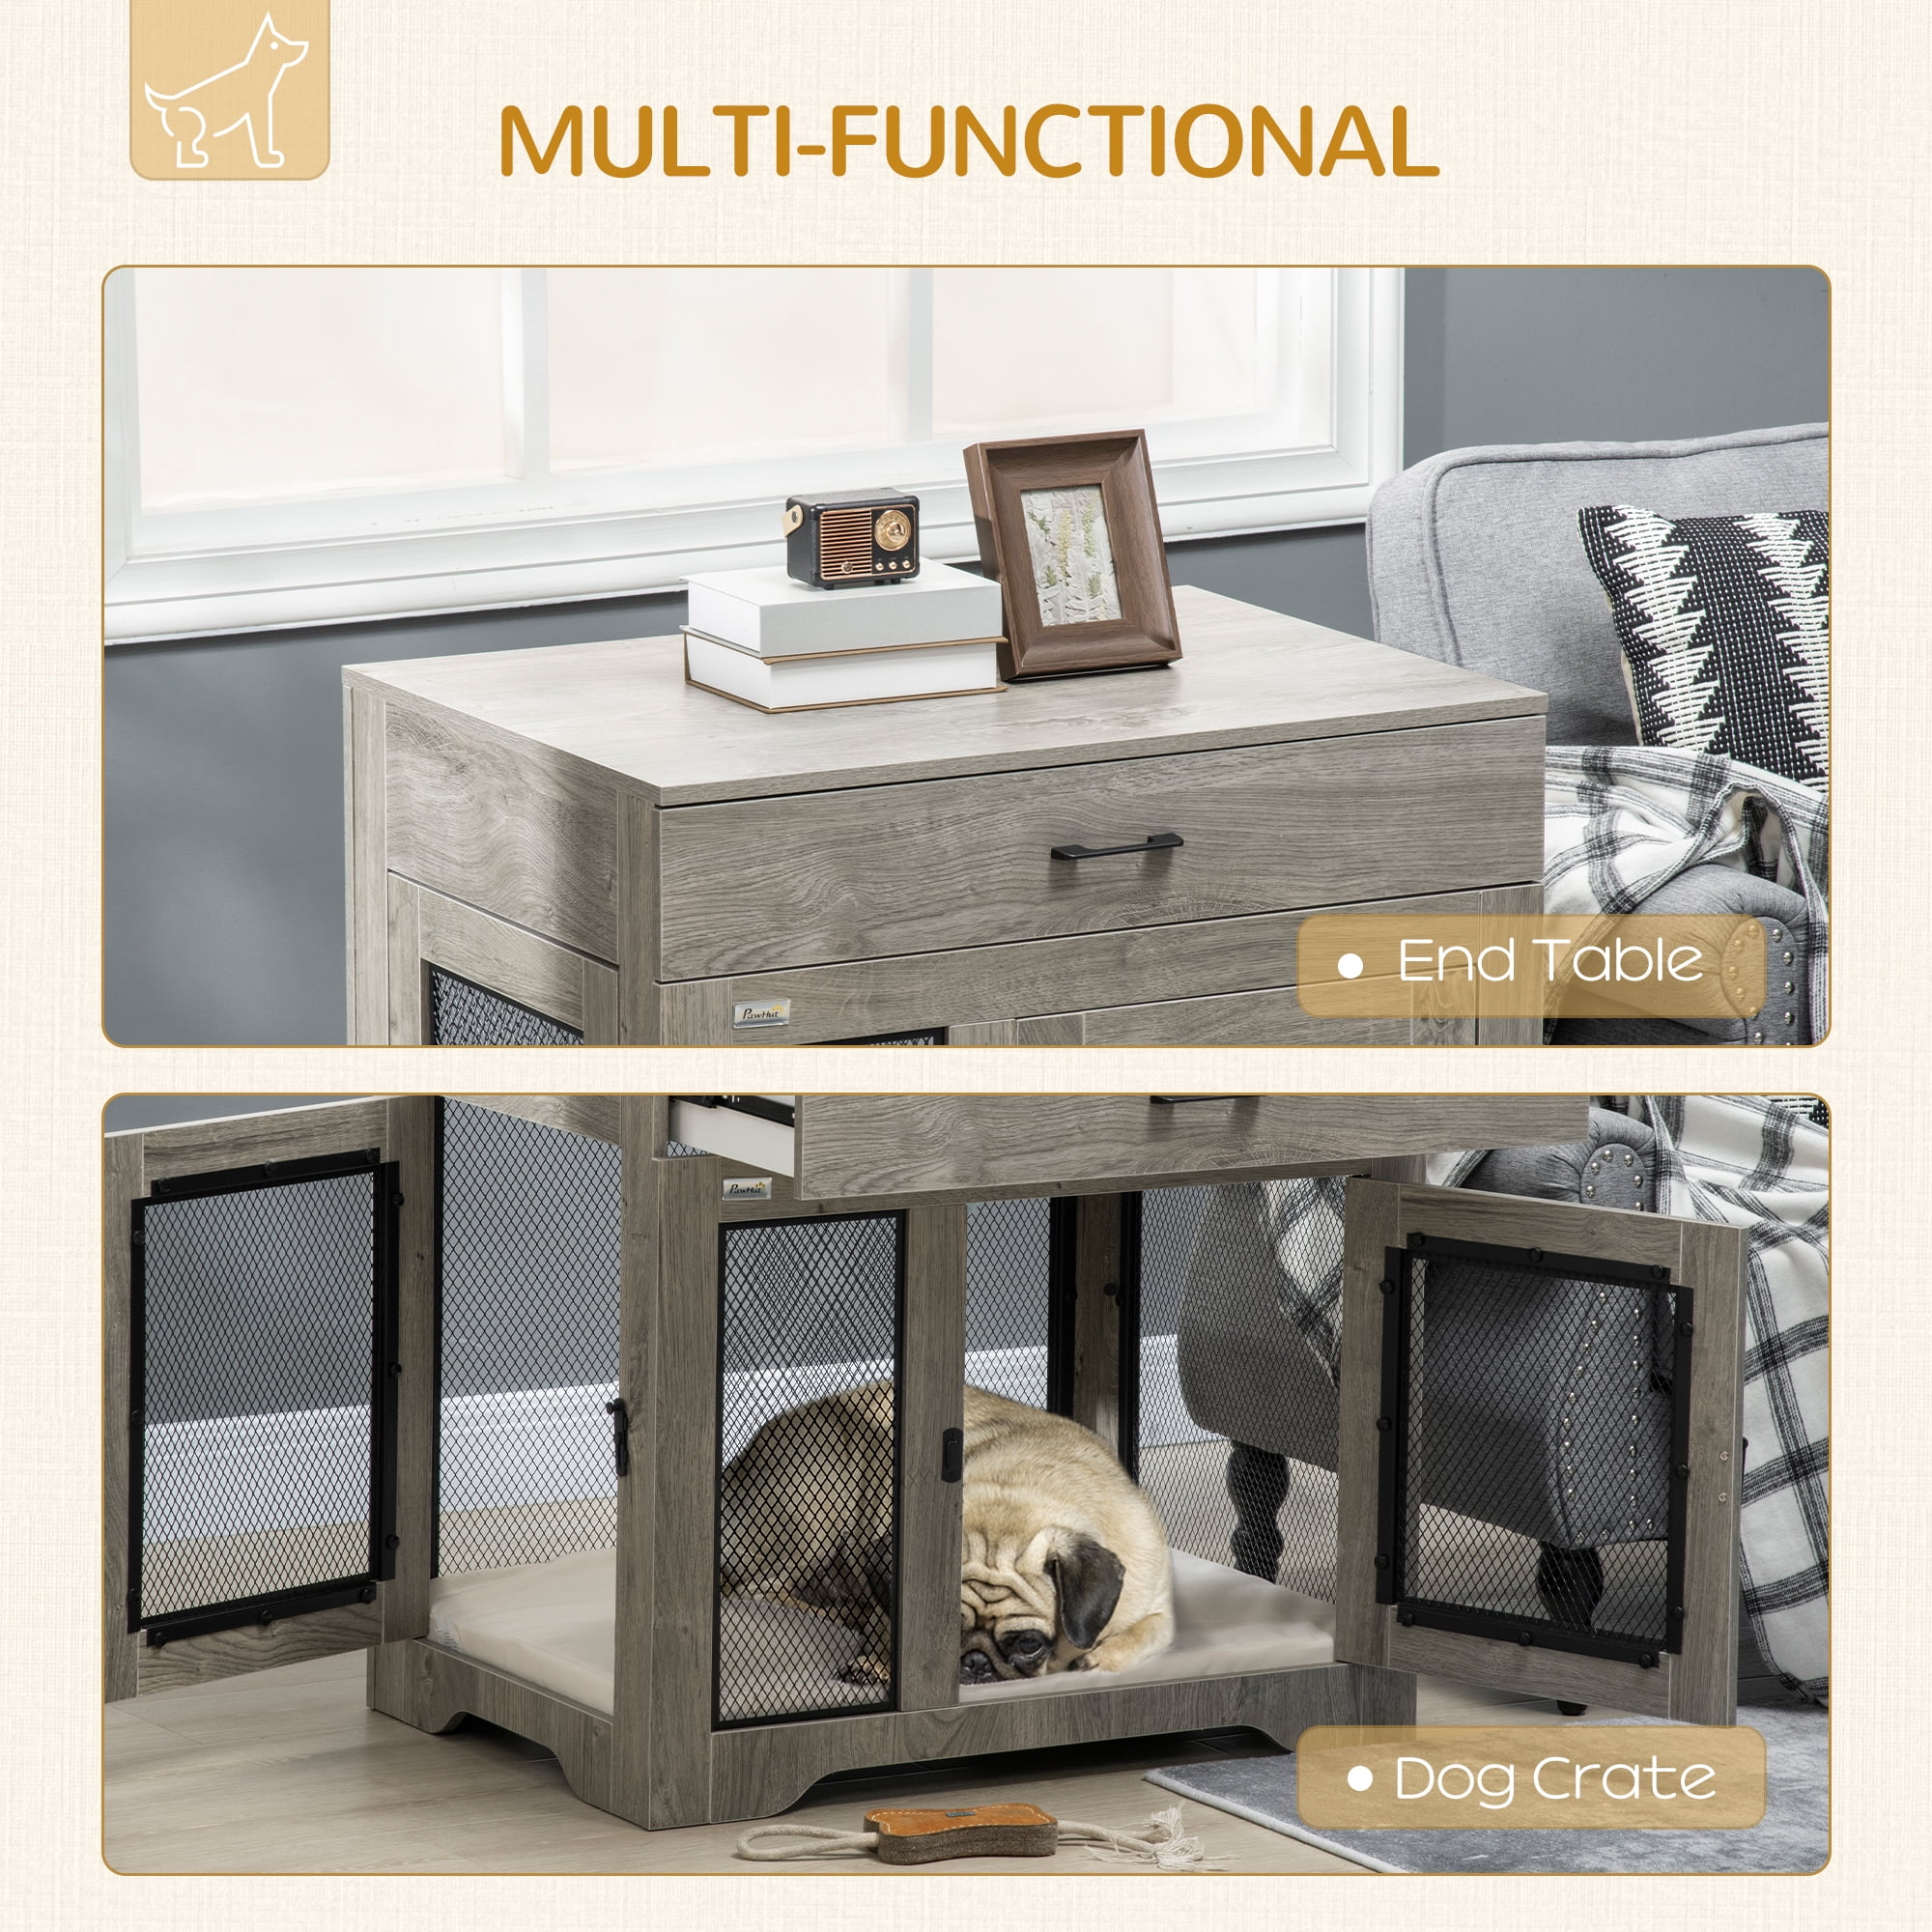 Monique Furniture Style Dog Crate End Table Decorative Puppy House With  Soft Cushion, Side Holes, Removable Door Panel, Safety Lock, Indoor Use,  For